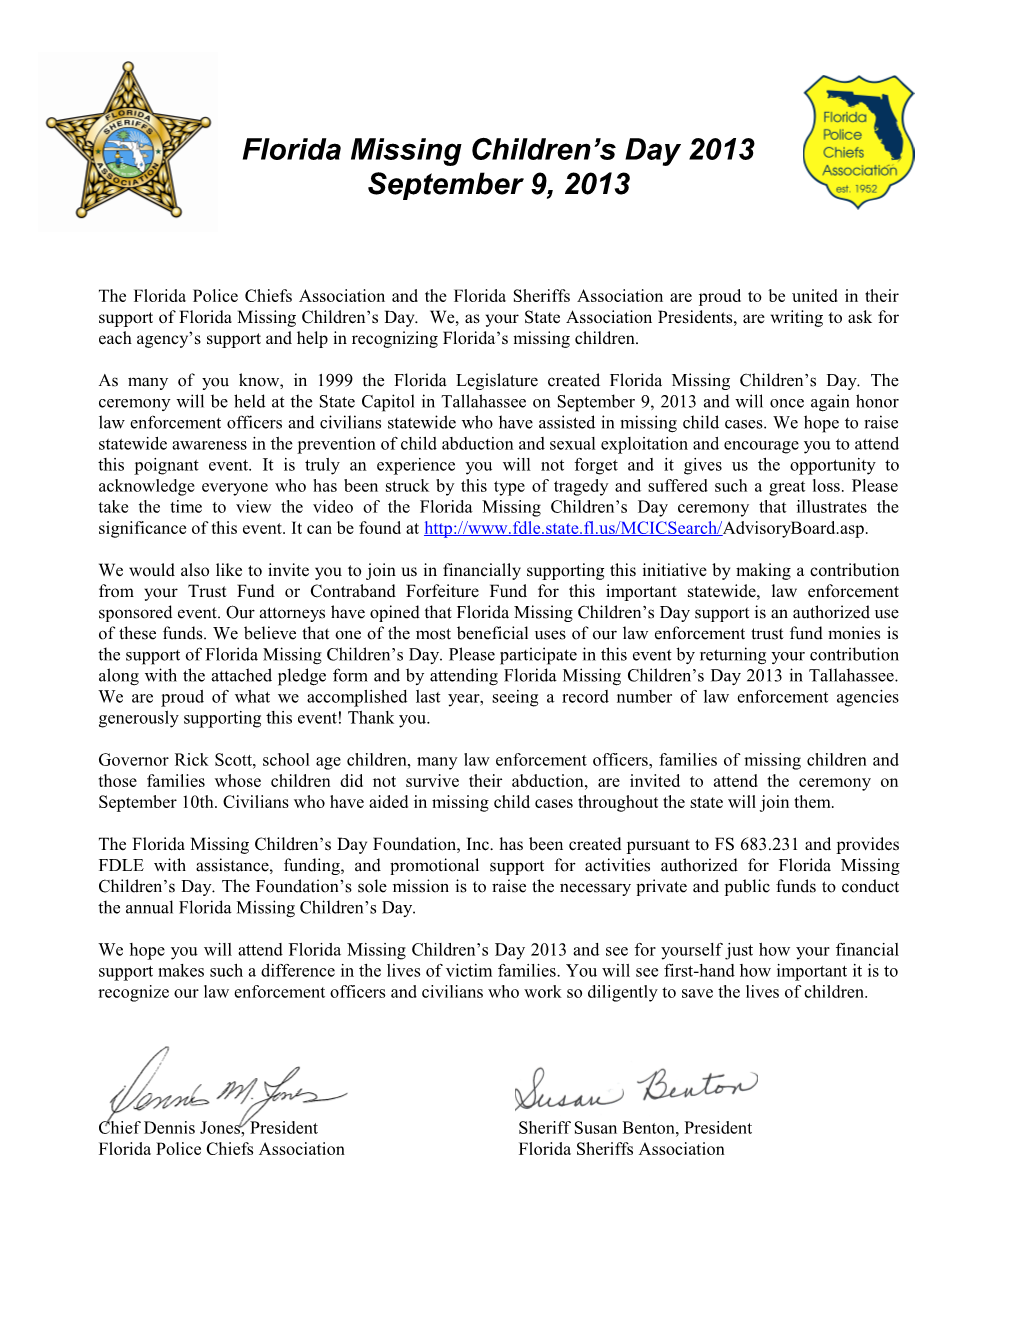 The Florida Police Chiefs Association and the Florida Sheriffs Association Are Proud To